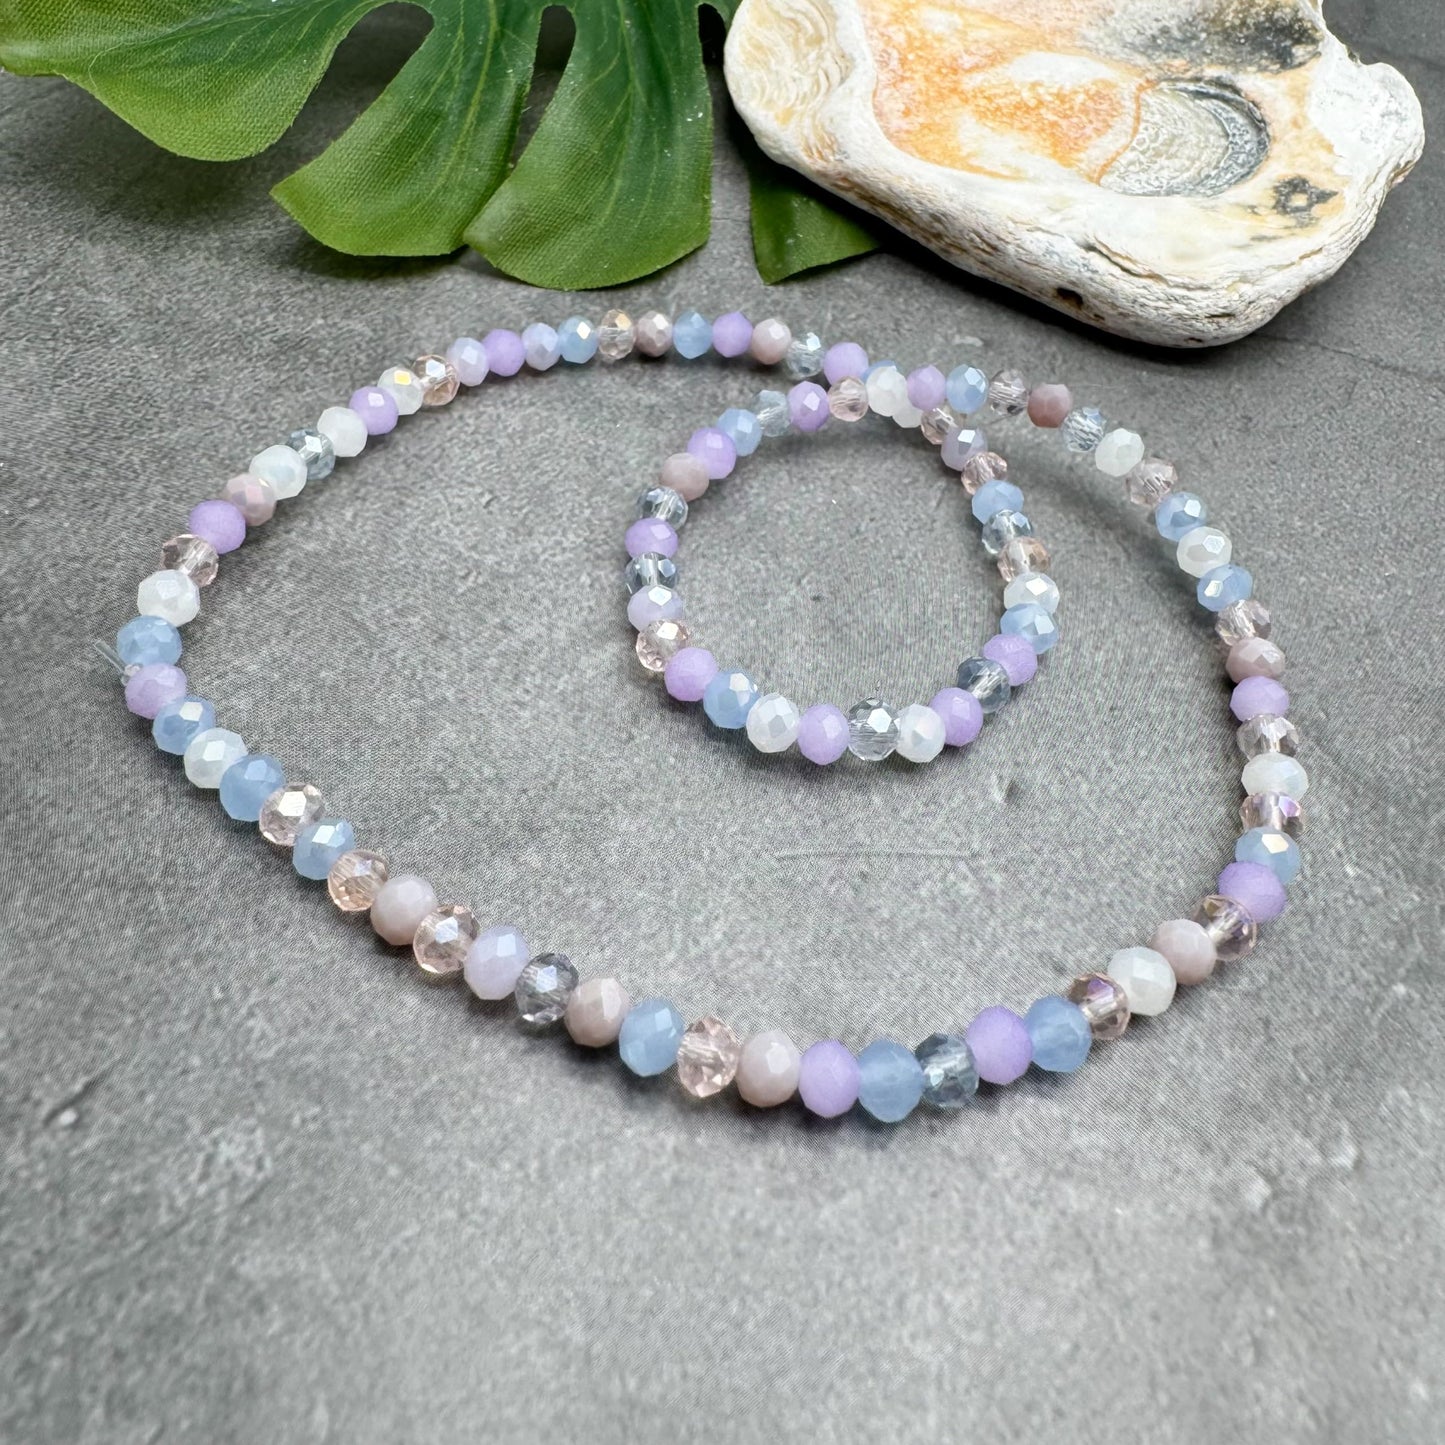 XXL Pale Pastels Faceted Glass Bead Anklet on Elastic - Handmade Pink Lilac White Blue Design : Plus Size Extra Large 13 inches - 4mm Beads in Pretty Summer Colours